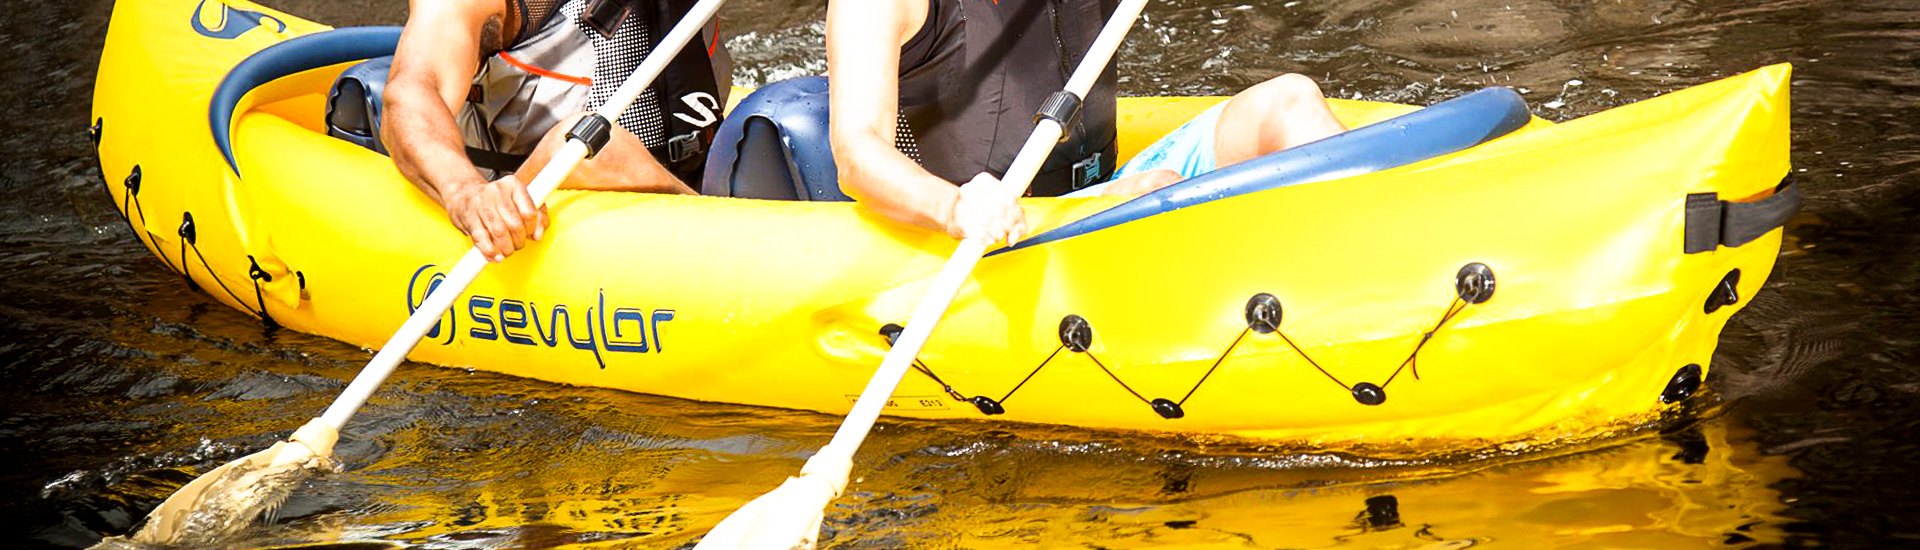 Kayaking | The Sporting Life on the Water